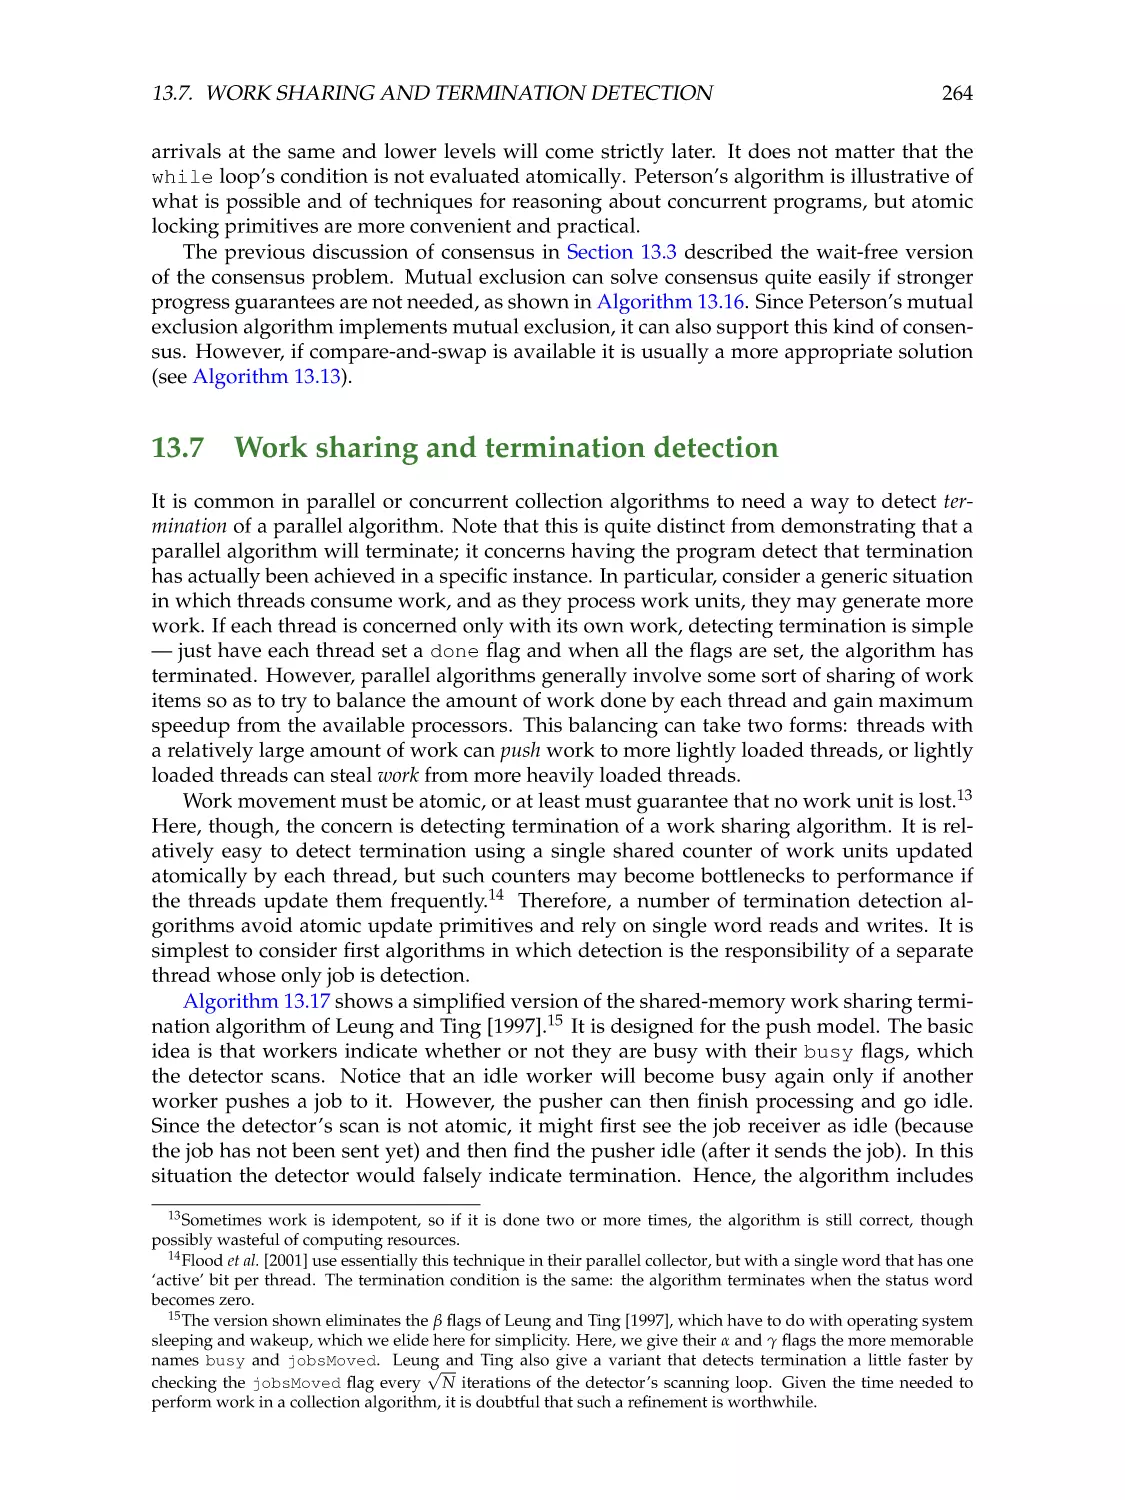 13.7. Work sharing and termination detection